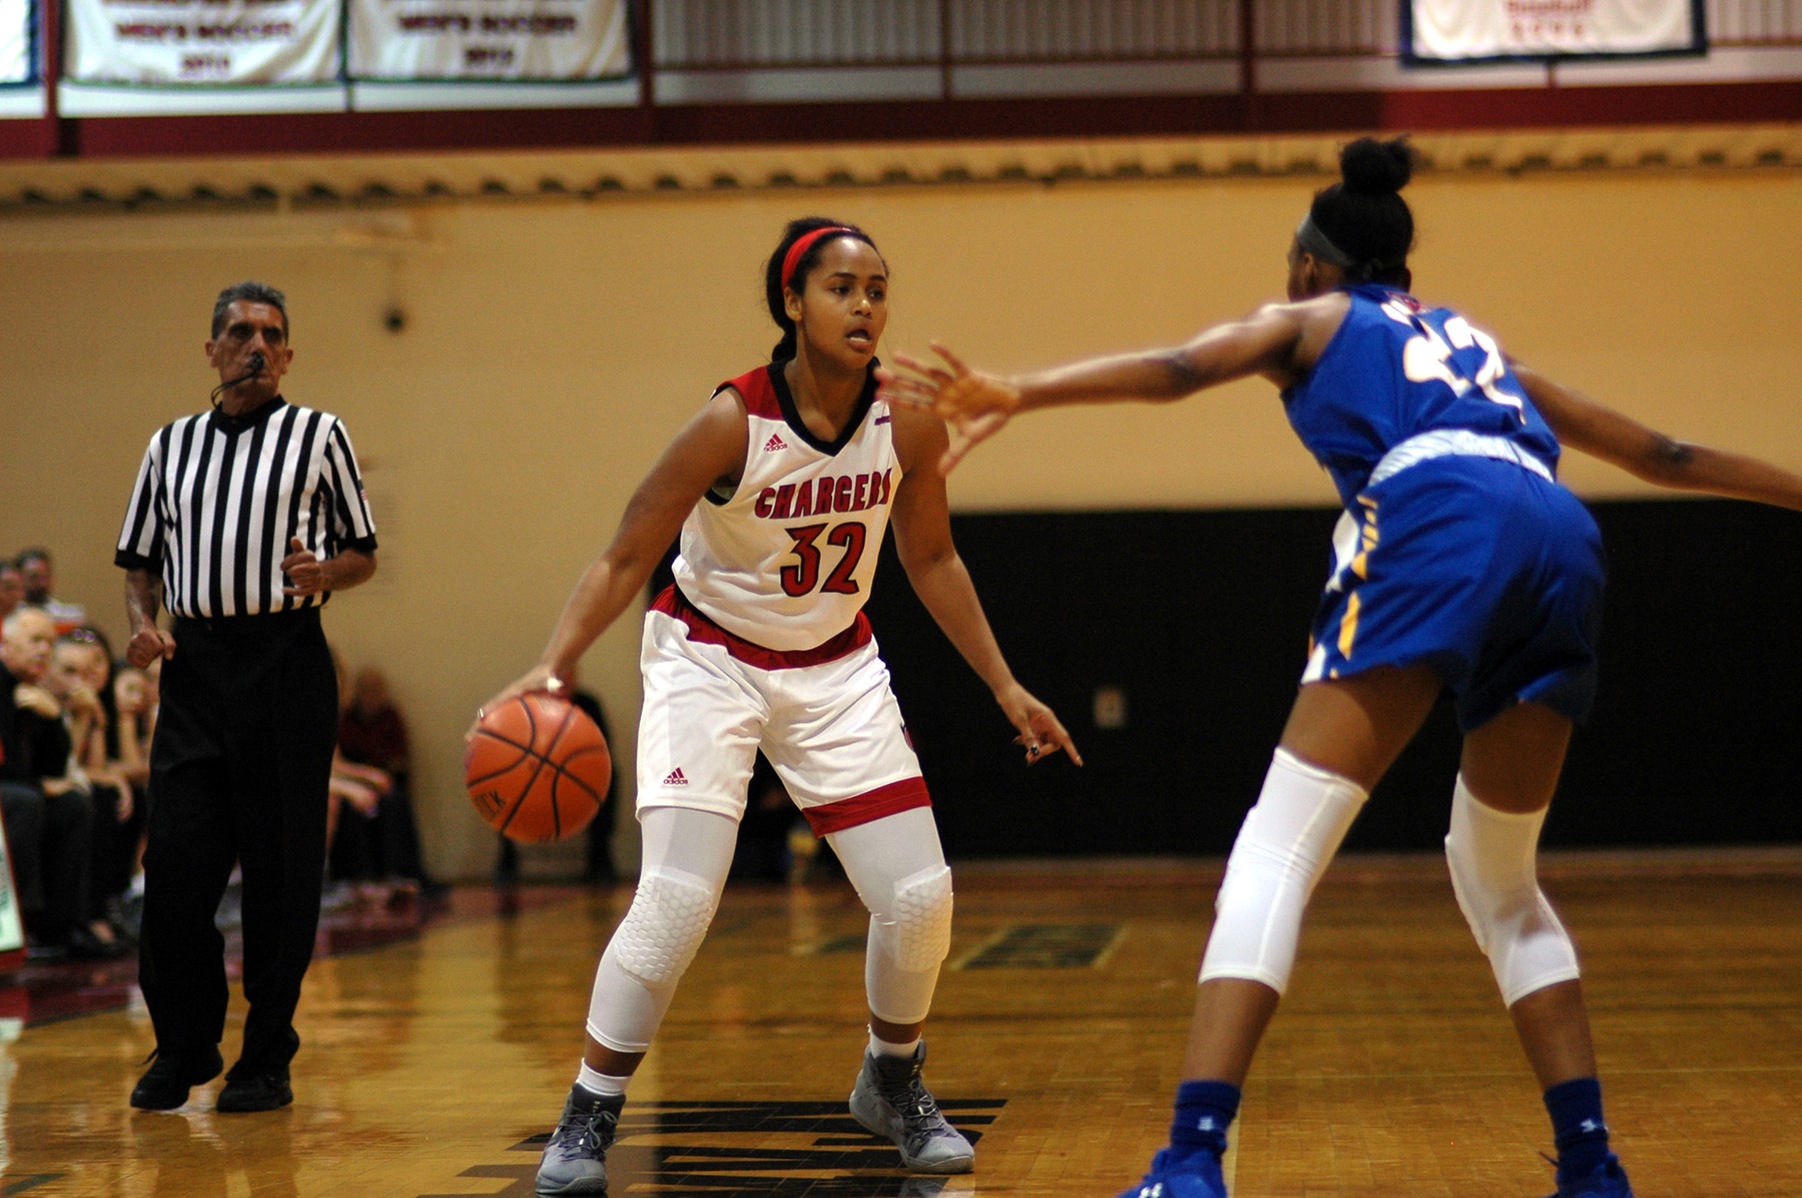 LADY CHARGERS TOP NYACK COLLEGE